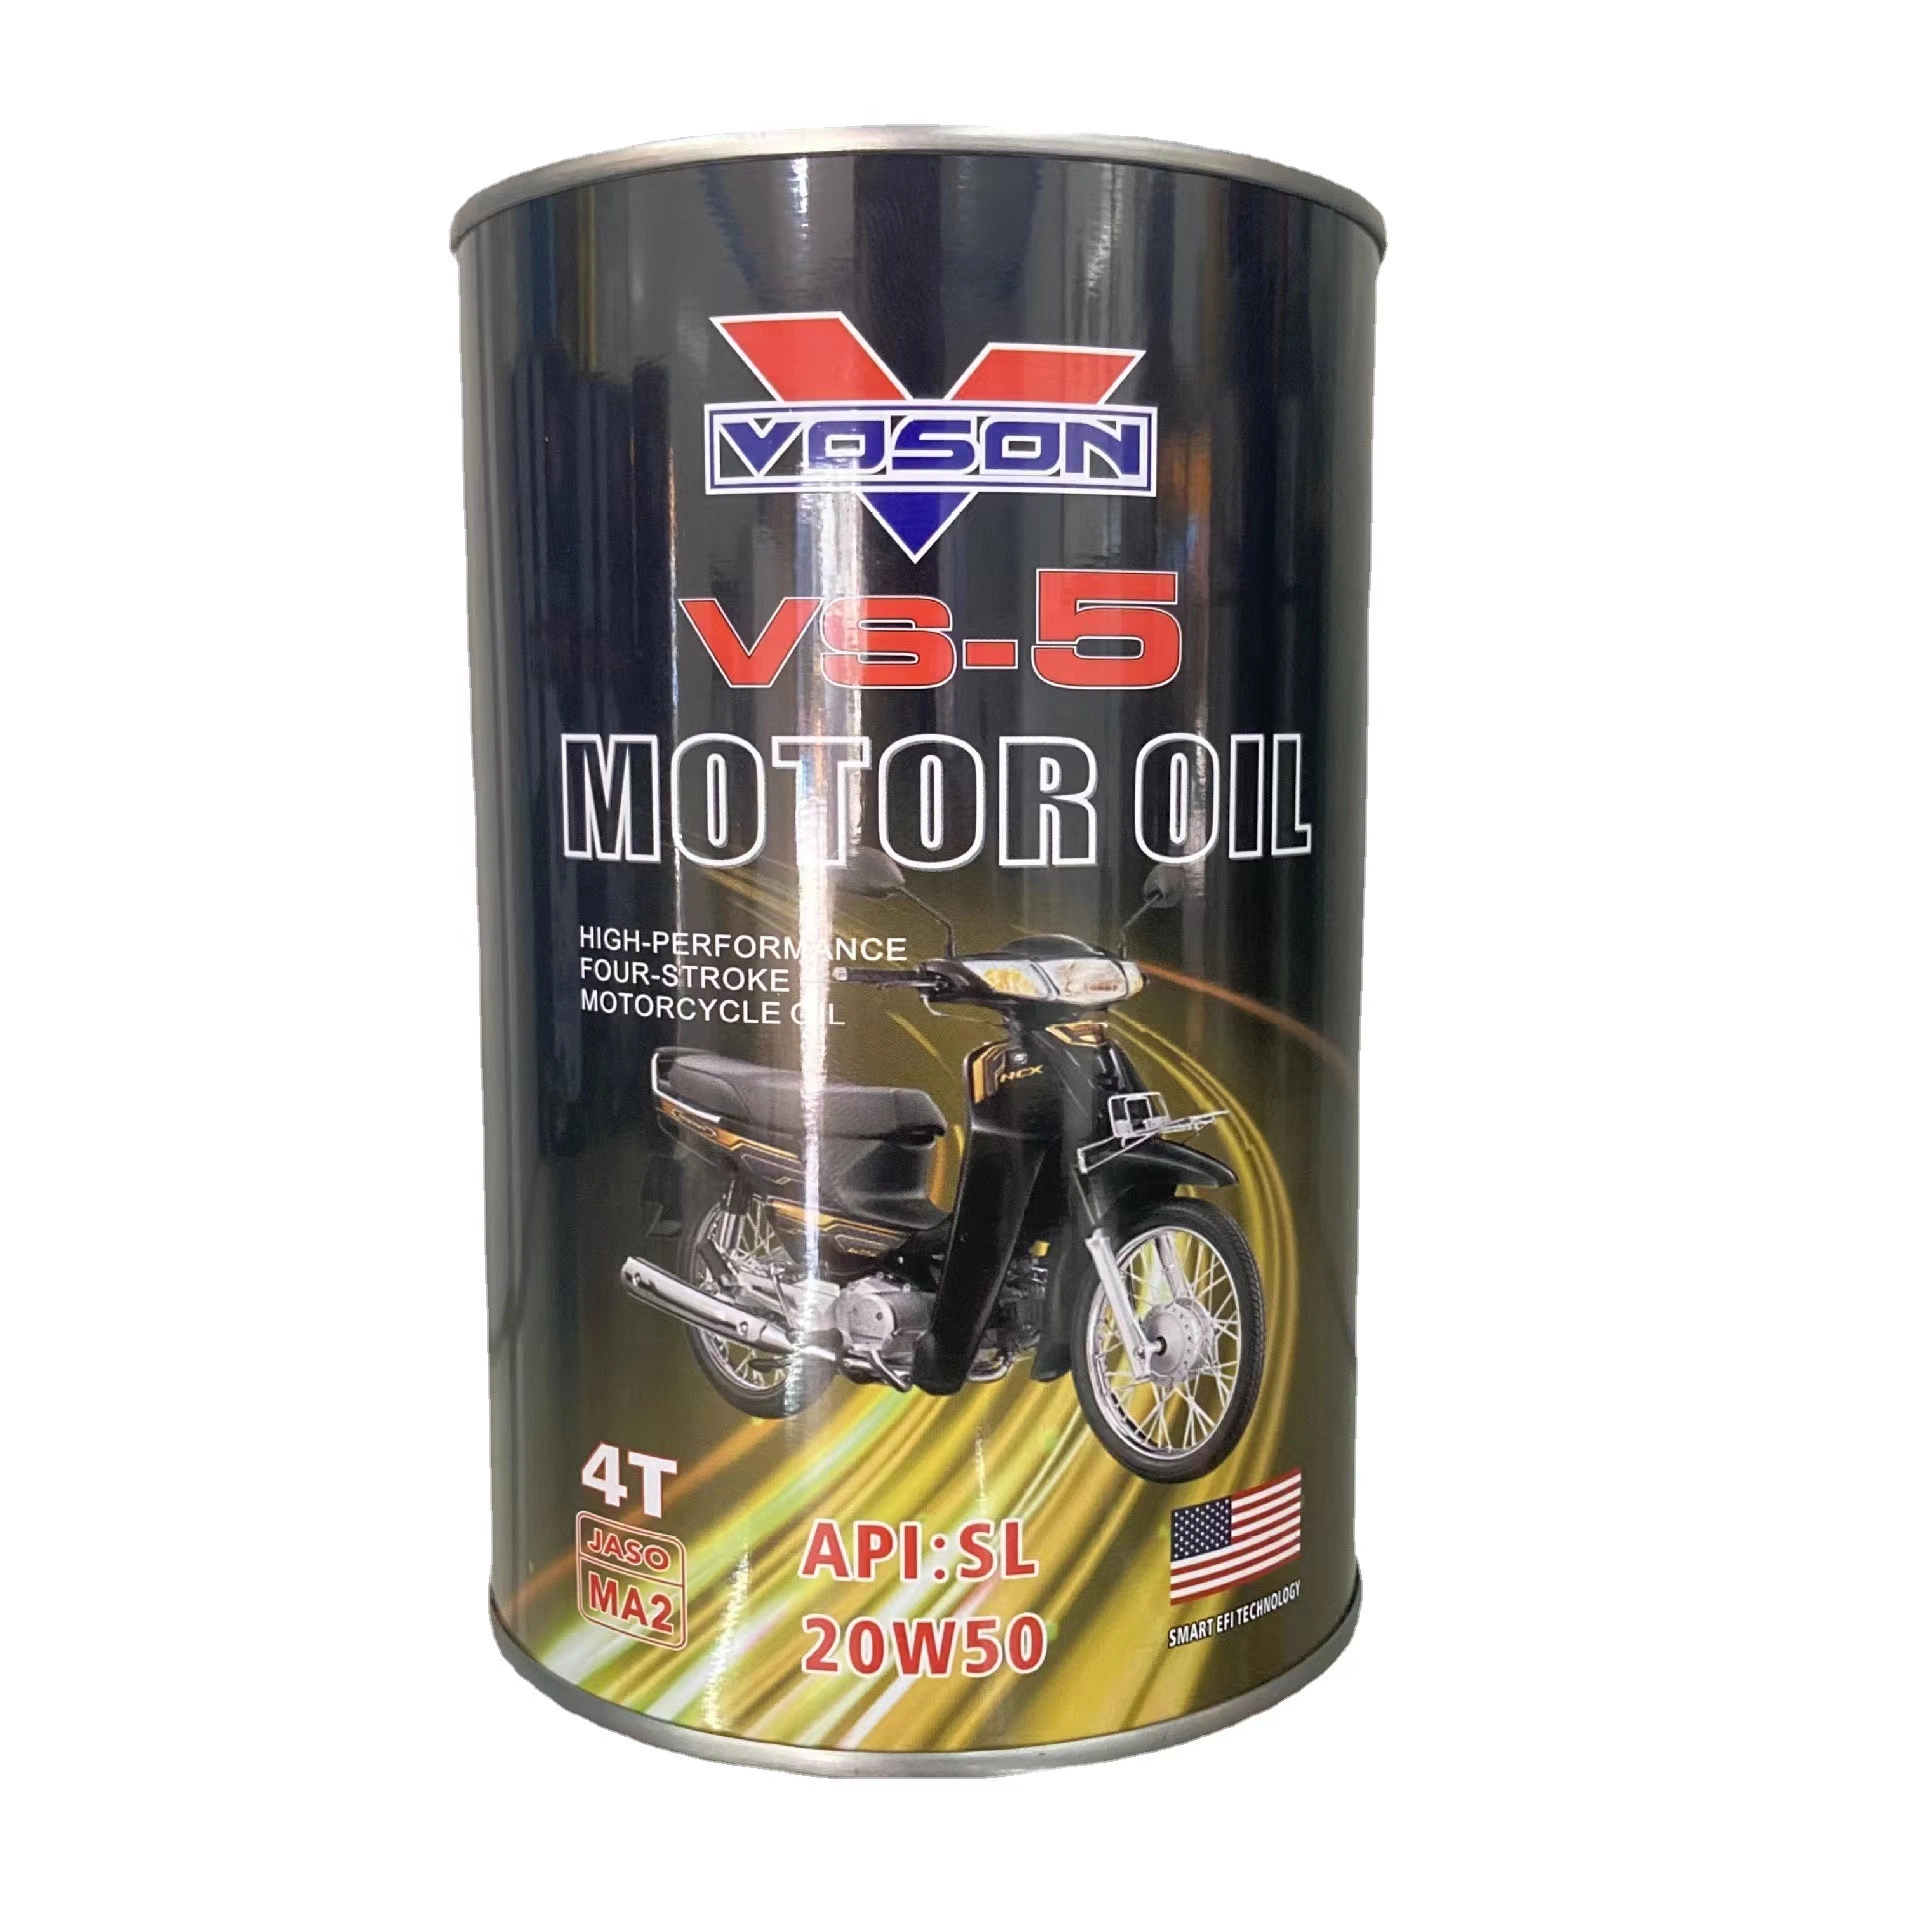 Motul Oil Motorcycle Oil SL 20W50 1L Ma2 4t Engine Oil Is Exported to Southeast Asia